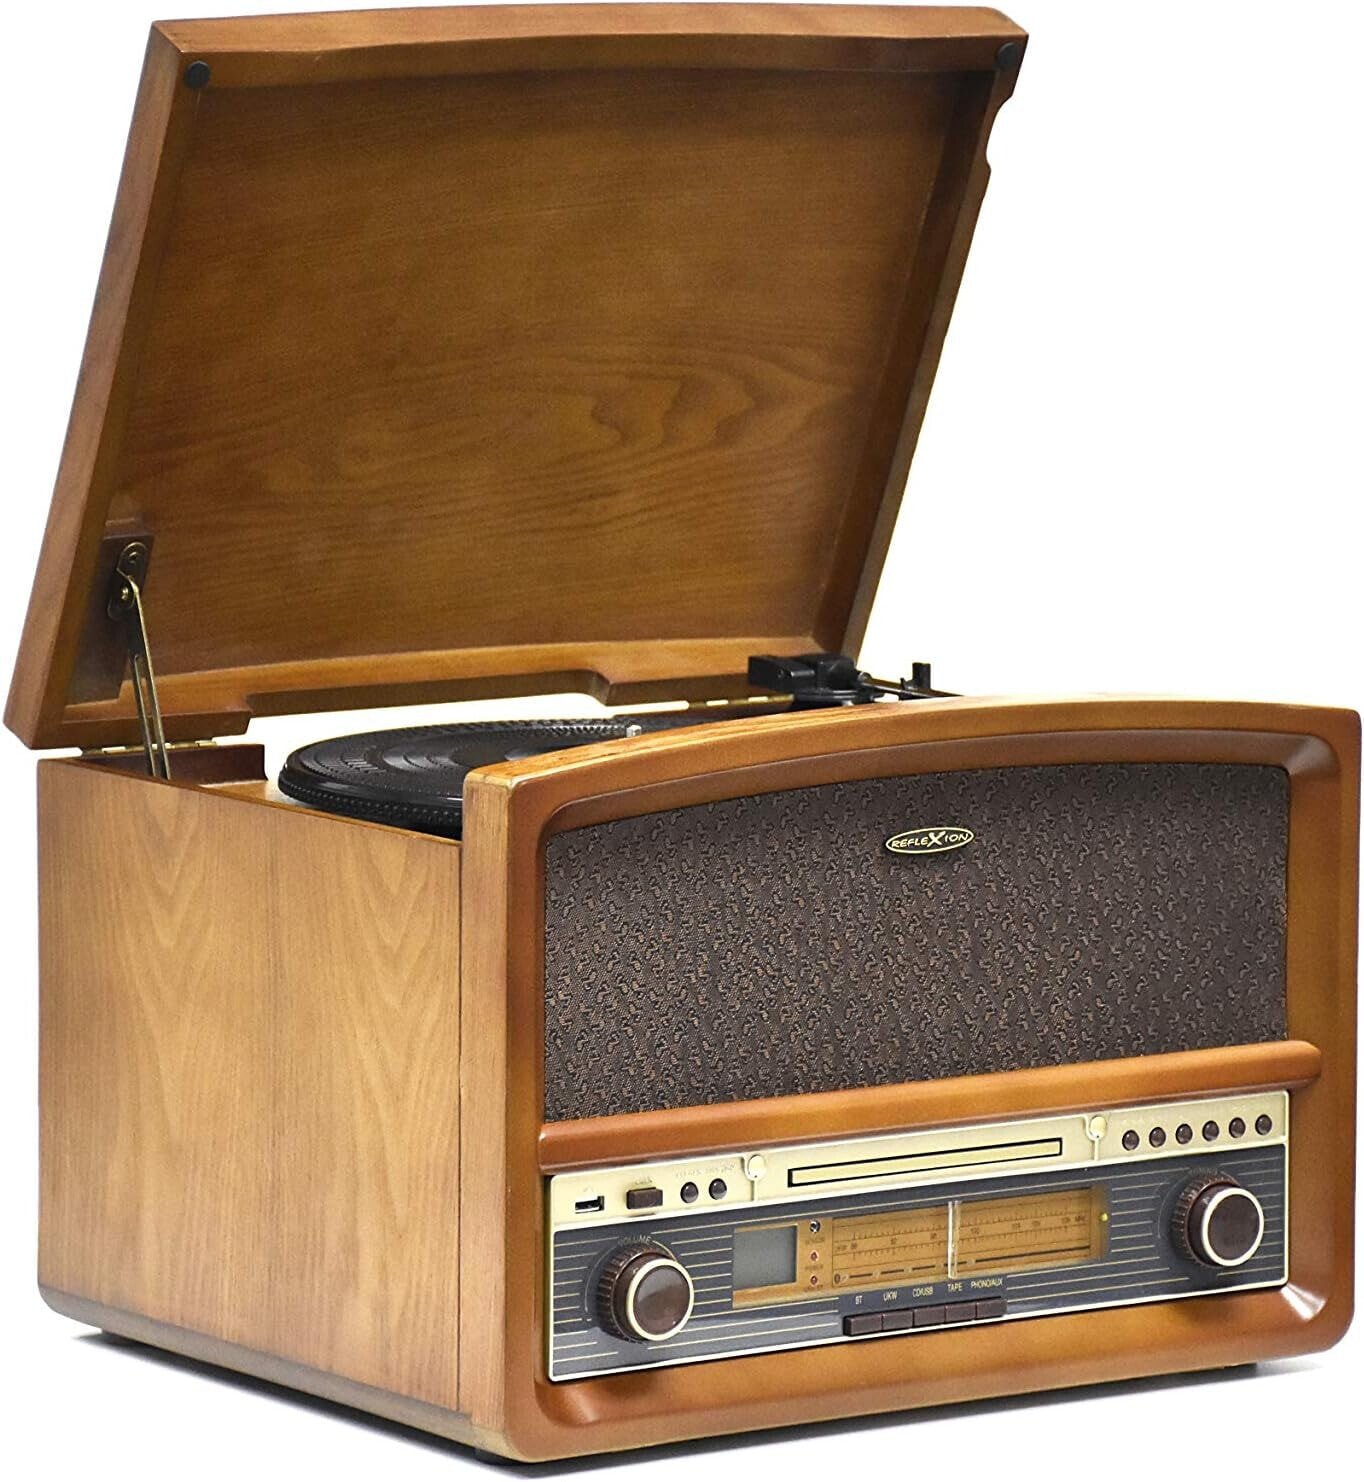 REFLEXION HIF1937 Retro Stereo System with Turntable, Cassette, CD Player and Radio (CD/MP3, USB, LCD Display, Remote Control, 40 W), Brown